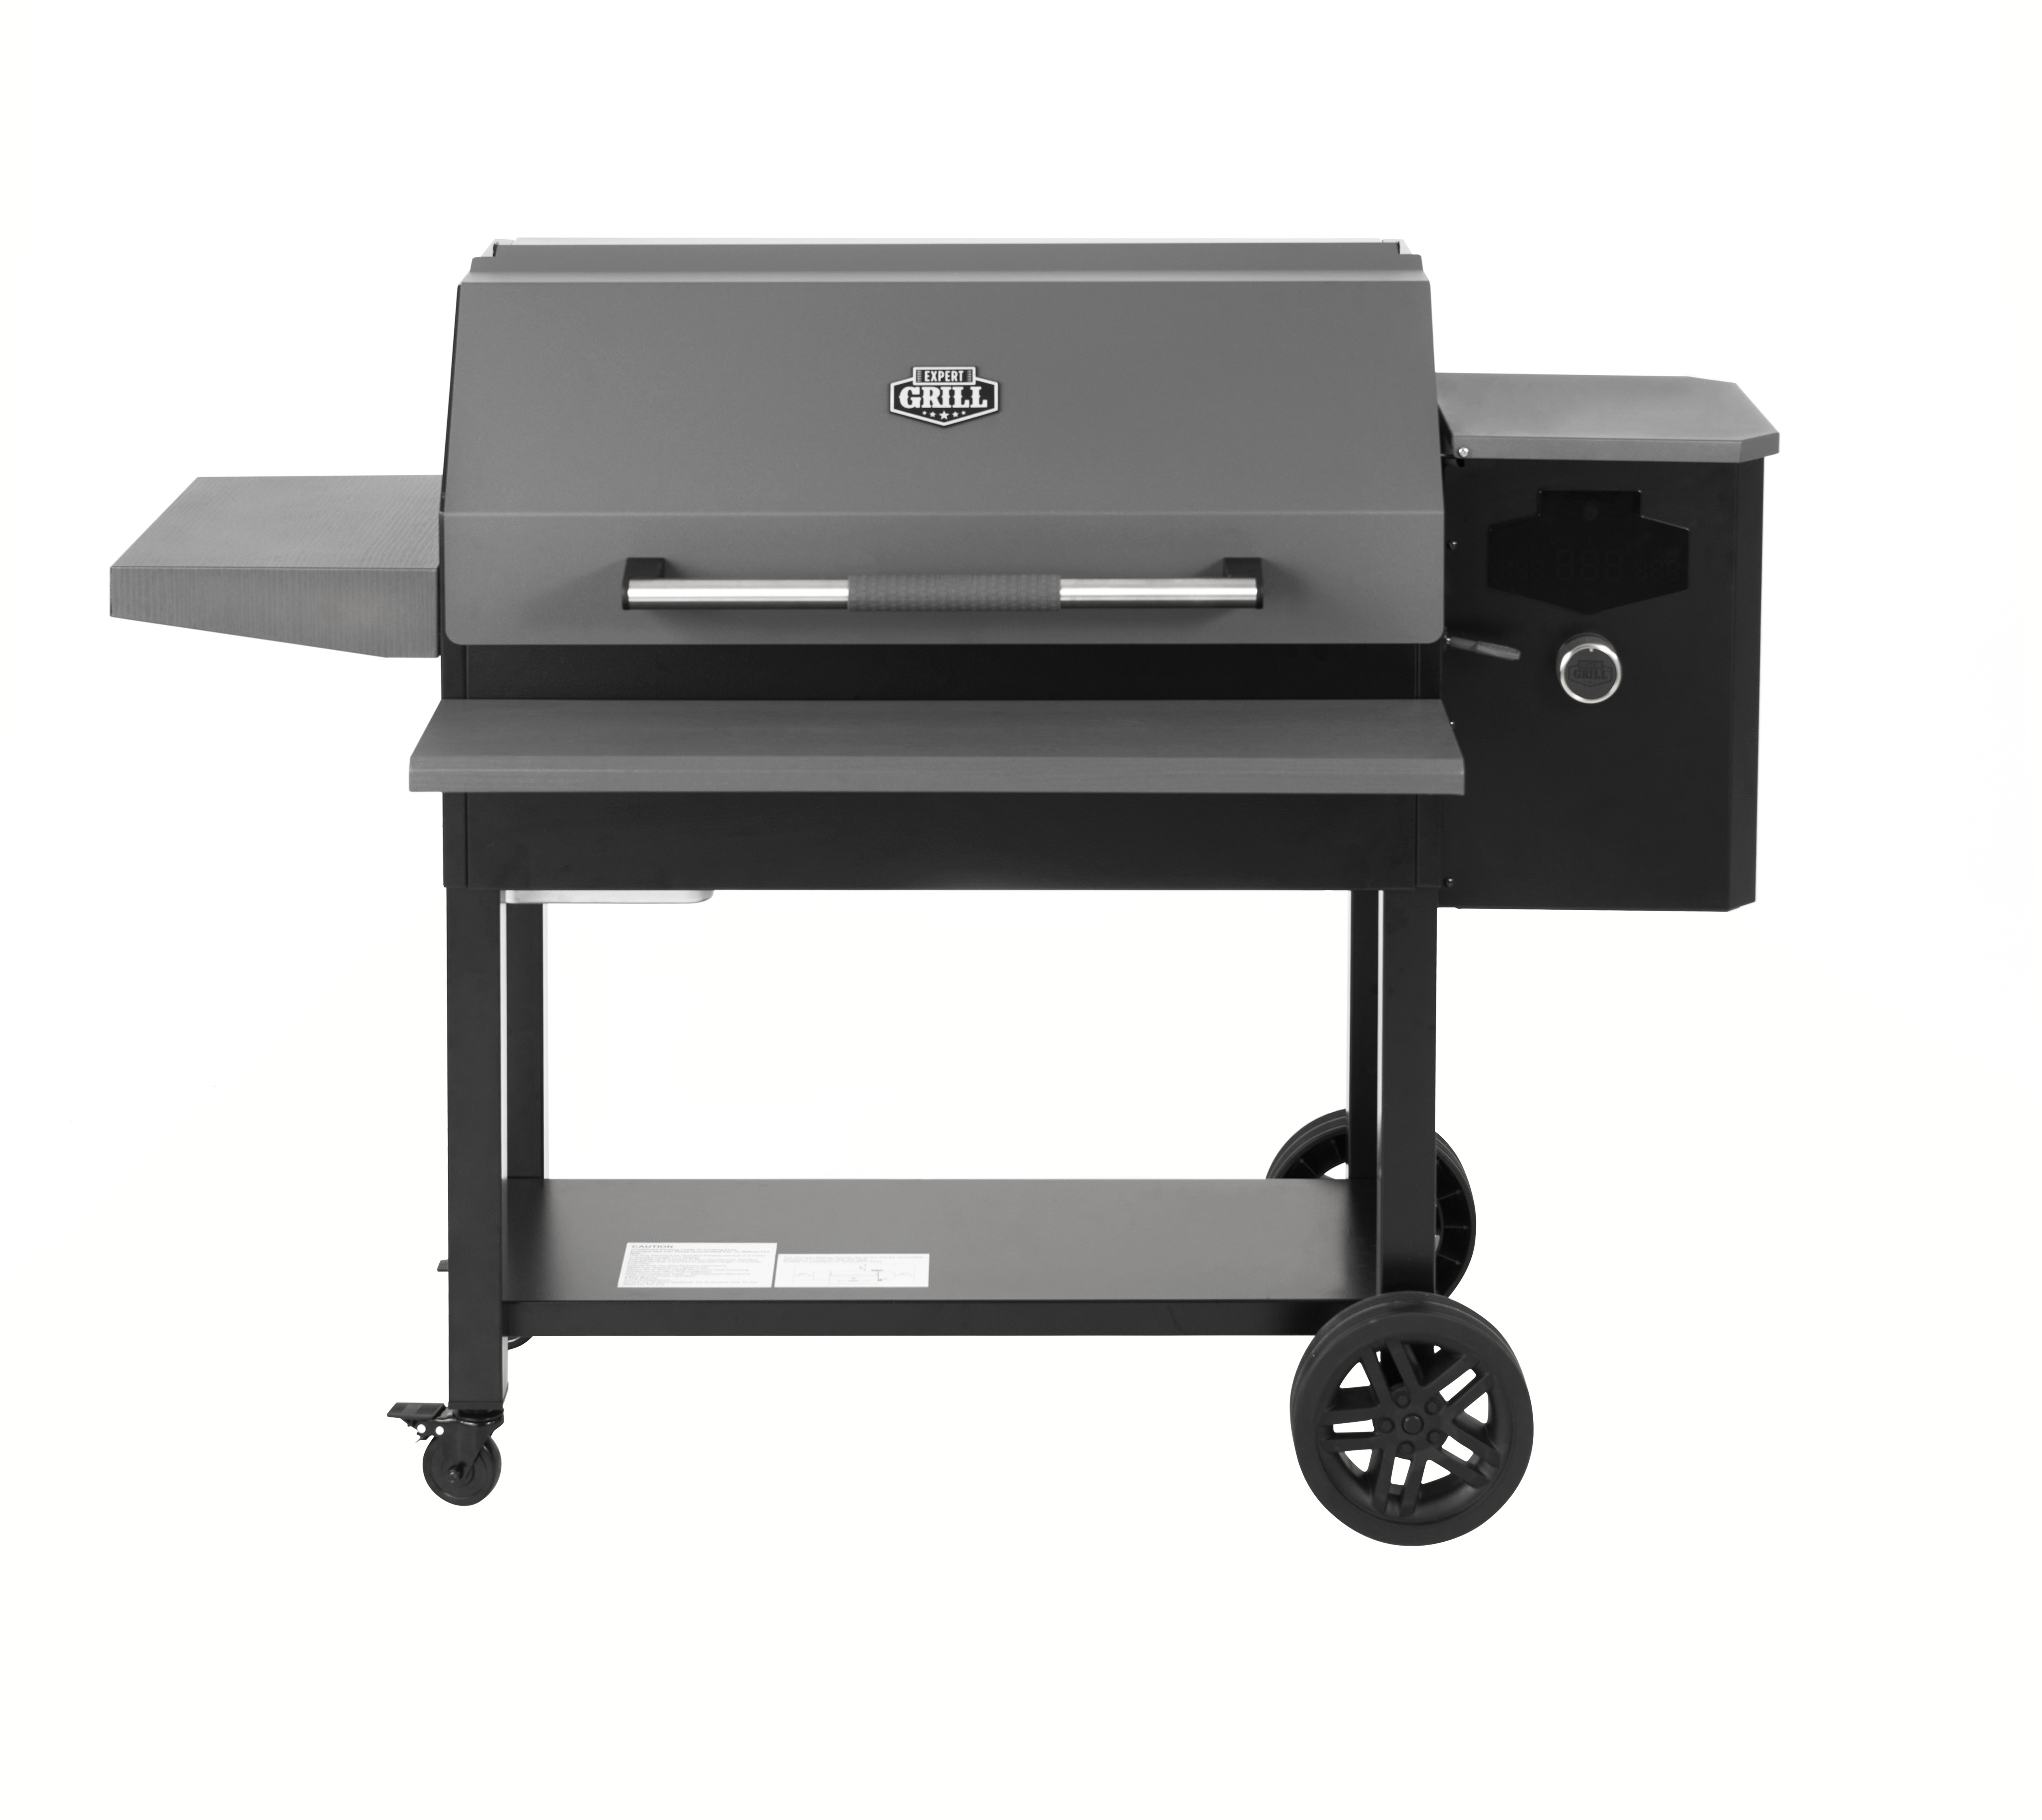 Expert Grill Atlas Pellet Grill and Smoker - image 1 of 16